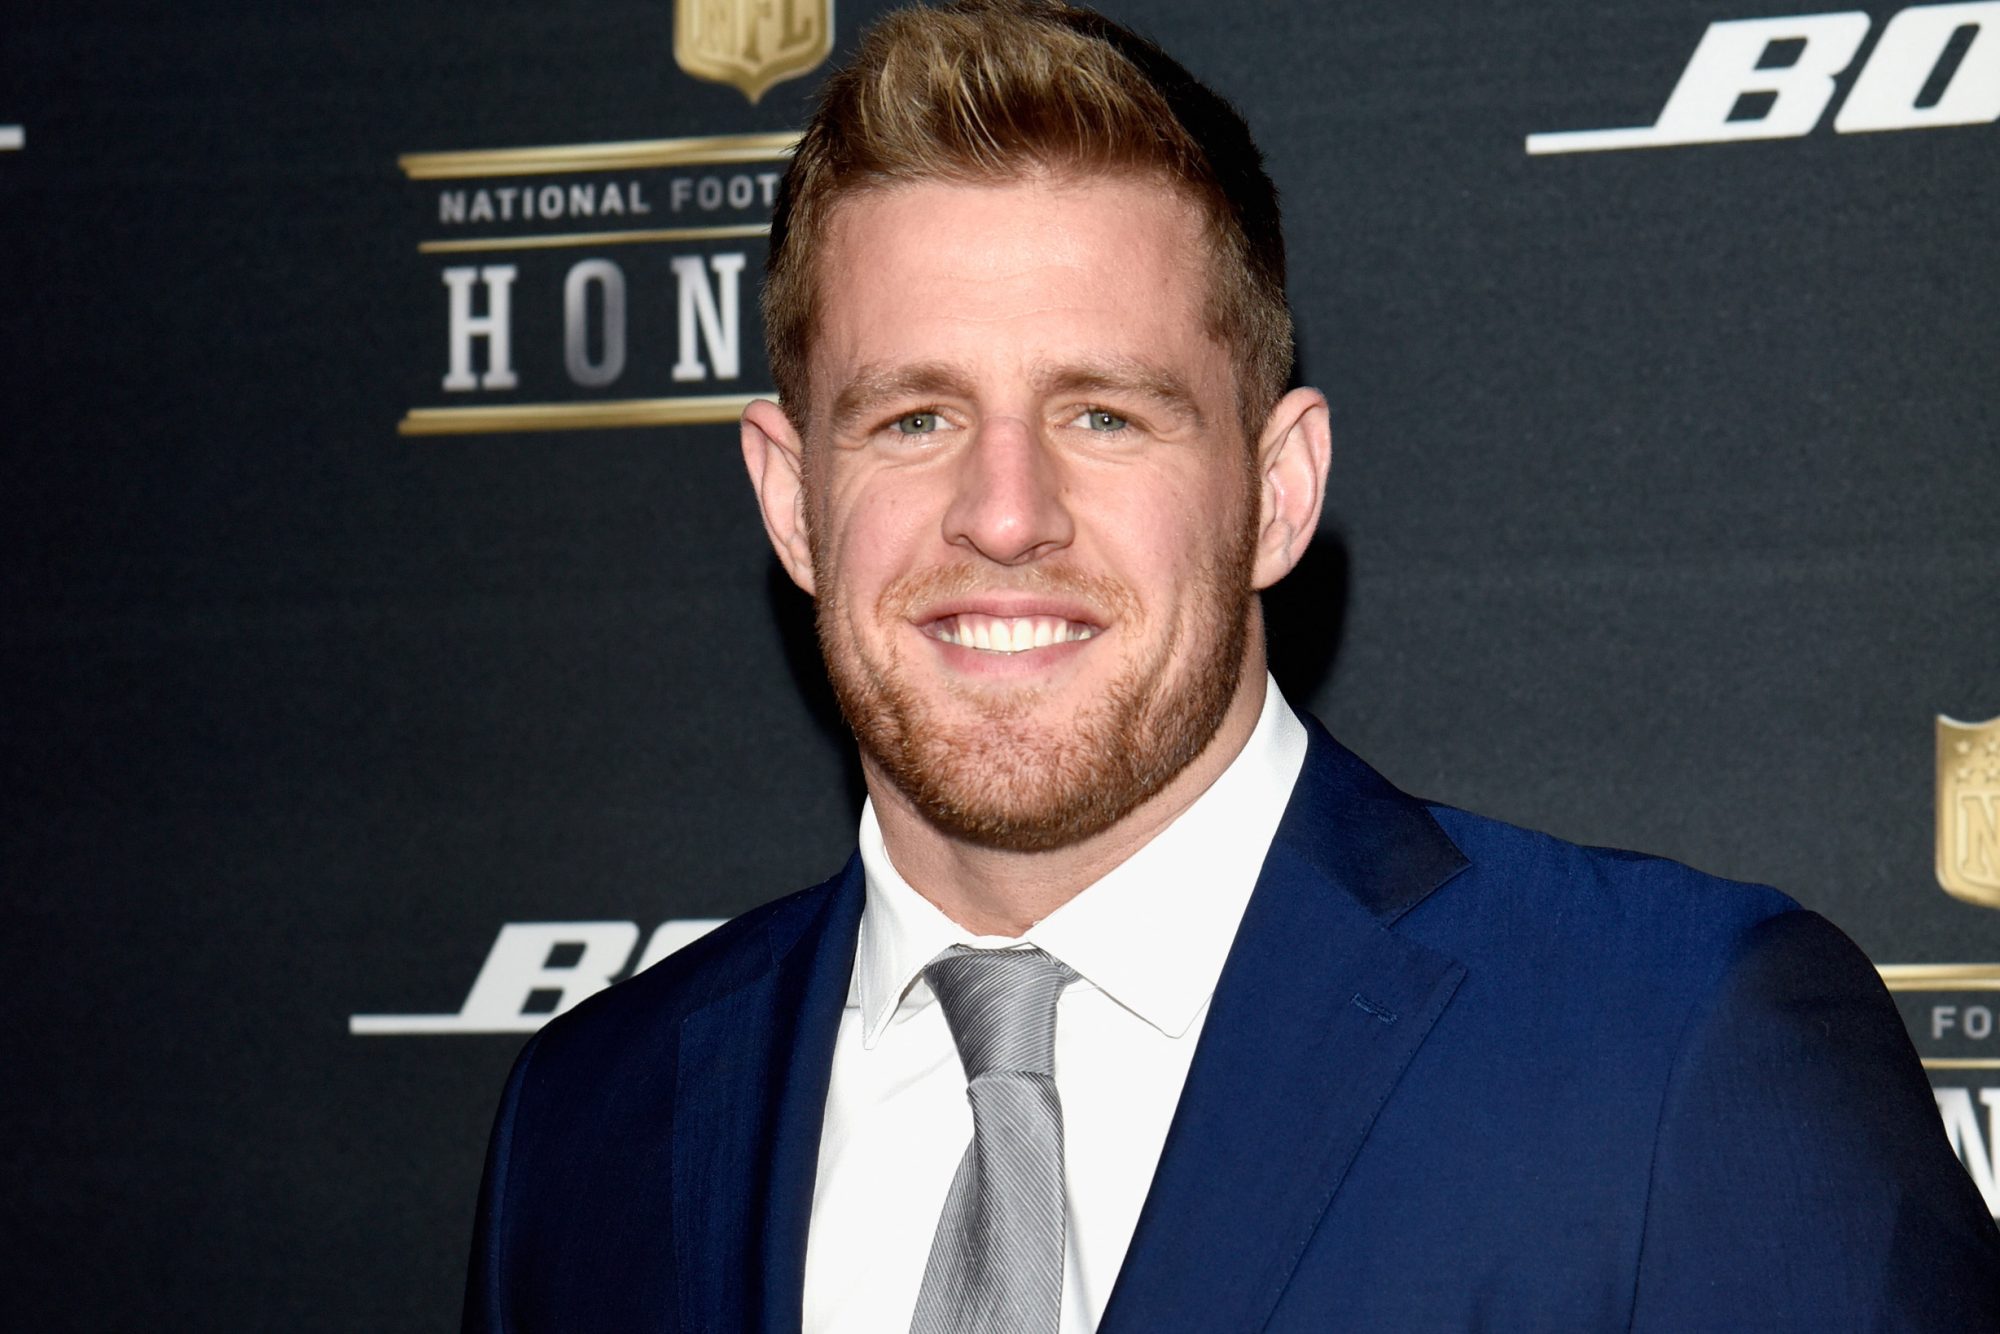 SAN FRANCISCO, CA - FEBRUARY 06: NFL player J. J. Watt attends the 5th Annual NFL Honors at Bill Graham Civic Auditorium on February 6, 2016 in San Francisco, California. (Photo by Tim Mosenfelder/Getty Images)